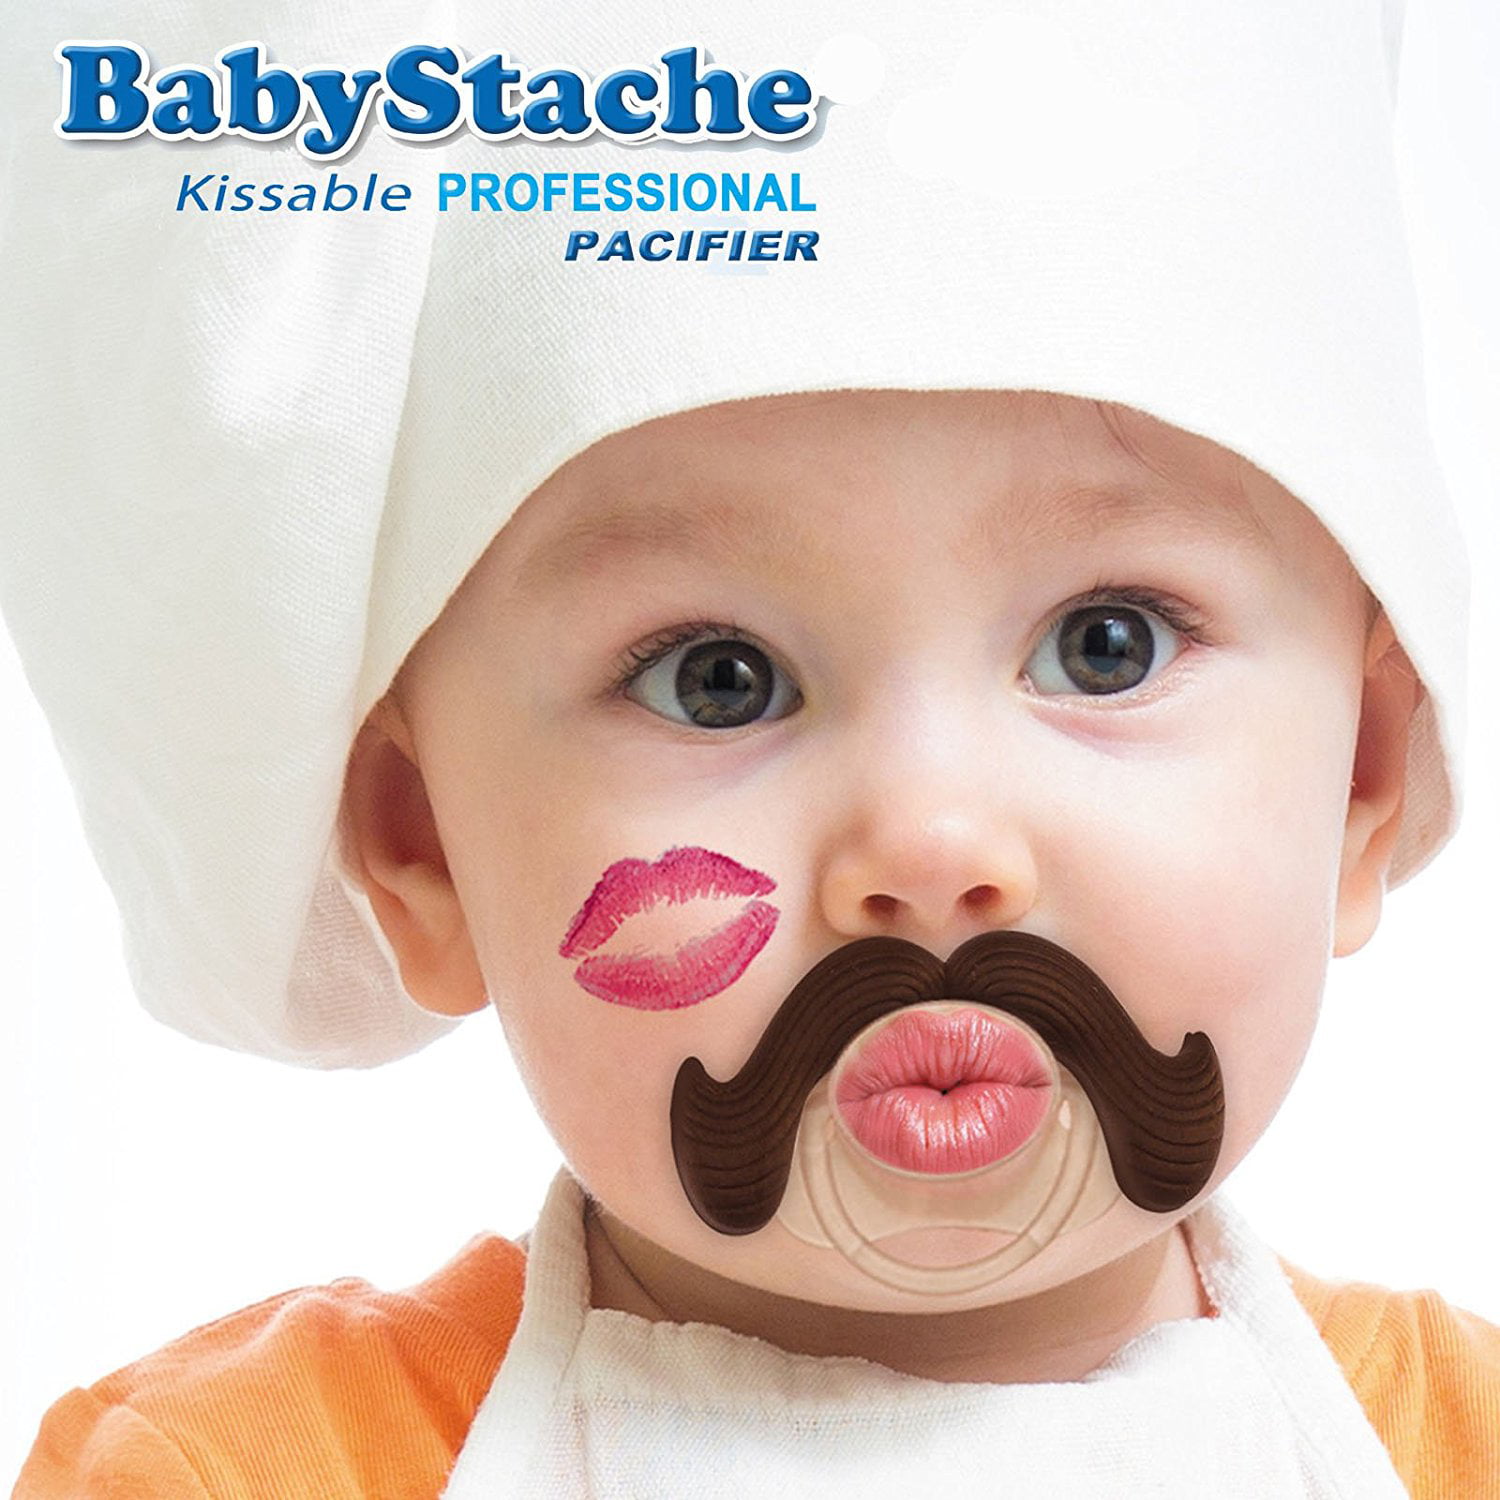 TMROW Cute Baby Pacifiers Designed Funny Teeth and Mustaches Make Them a Perfect Baby Shower Gift